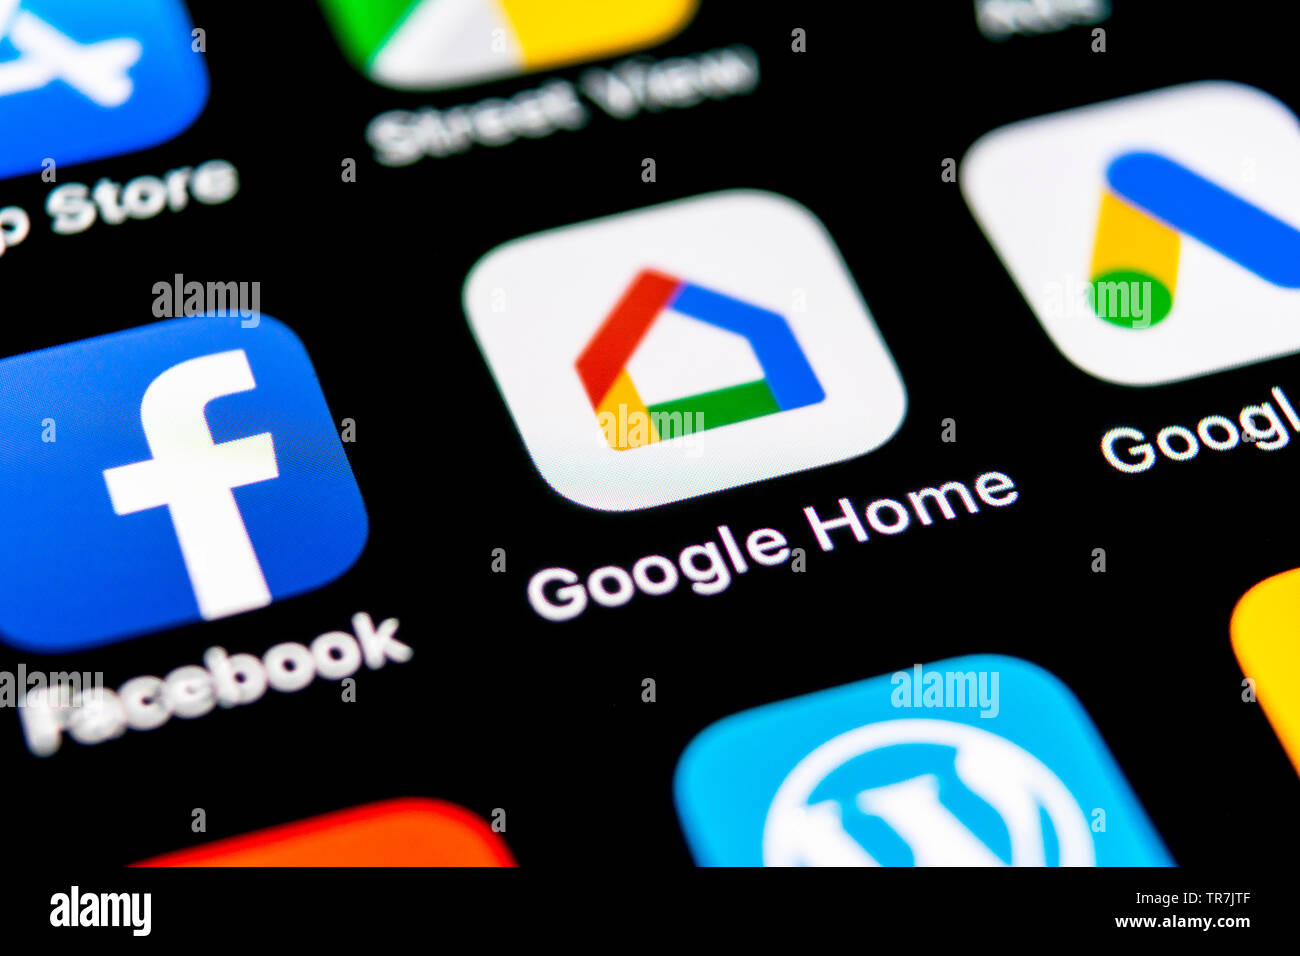 Sankt-Petersburg, Russia, September 30, 2018: Google Home application icon  on Apple iPhone X smartphone screen close-up. Google home app icon. Social  Stock Photo - Alamy